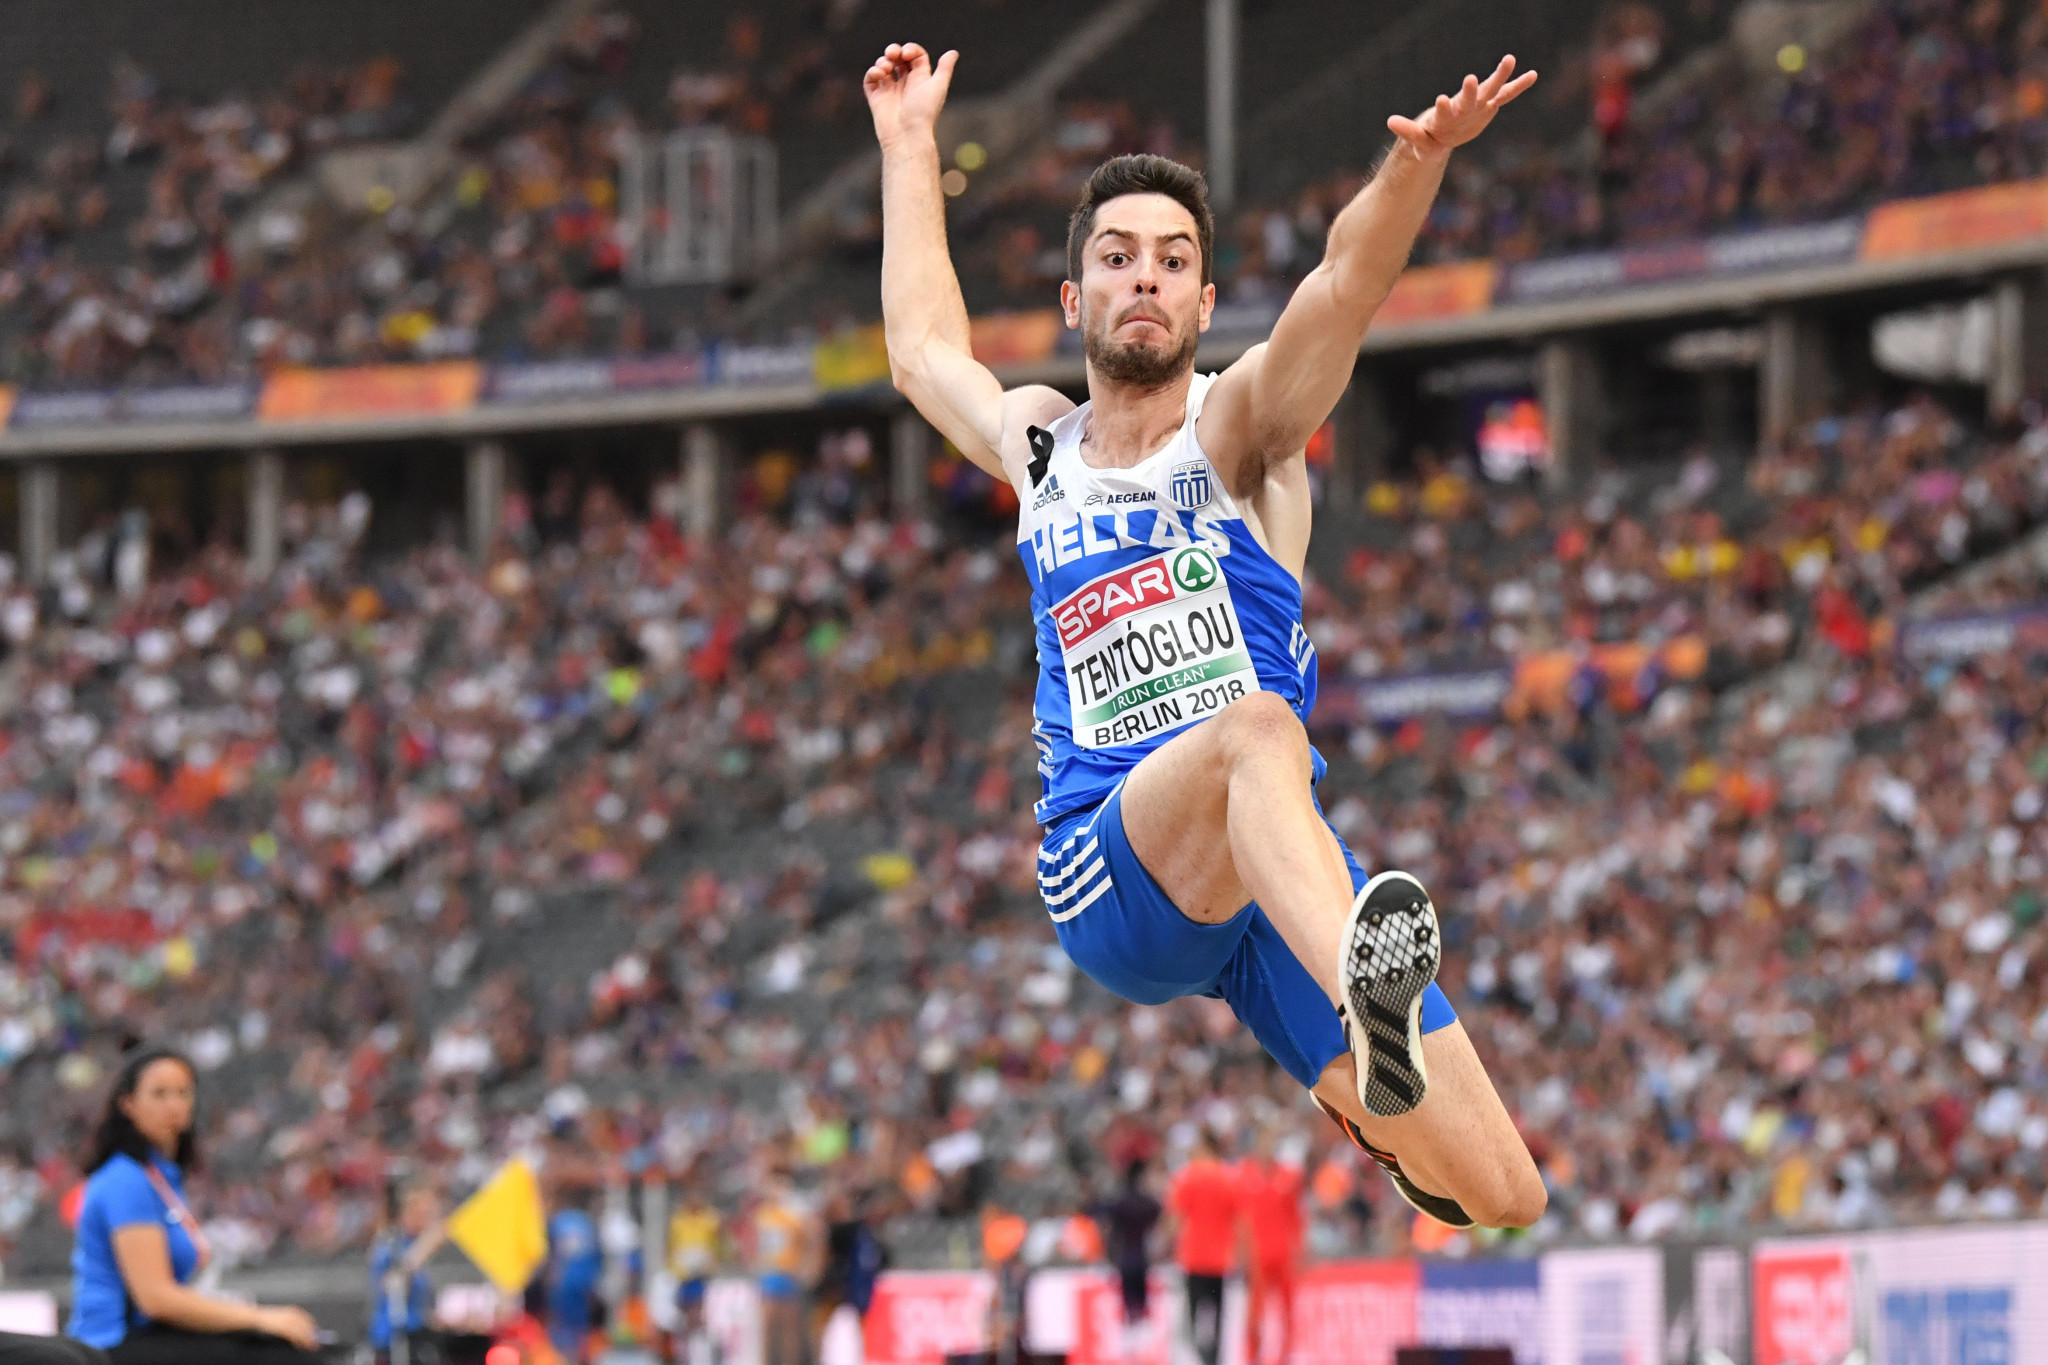 Greece's Miltiadis Tentoglou leaps to long jump gold ©Getty Images